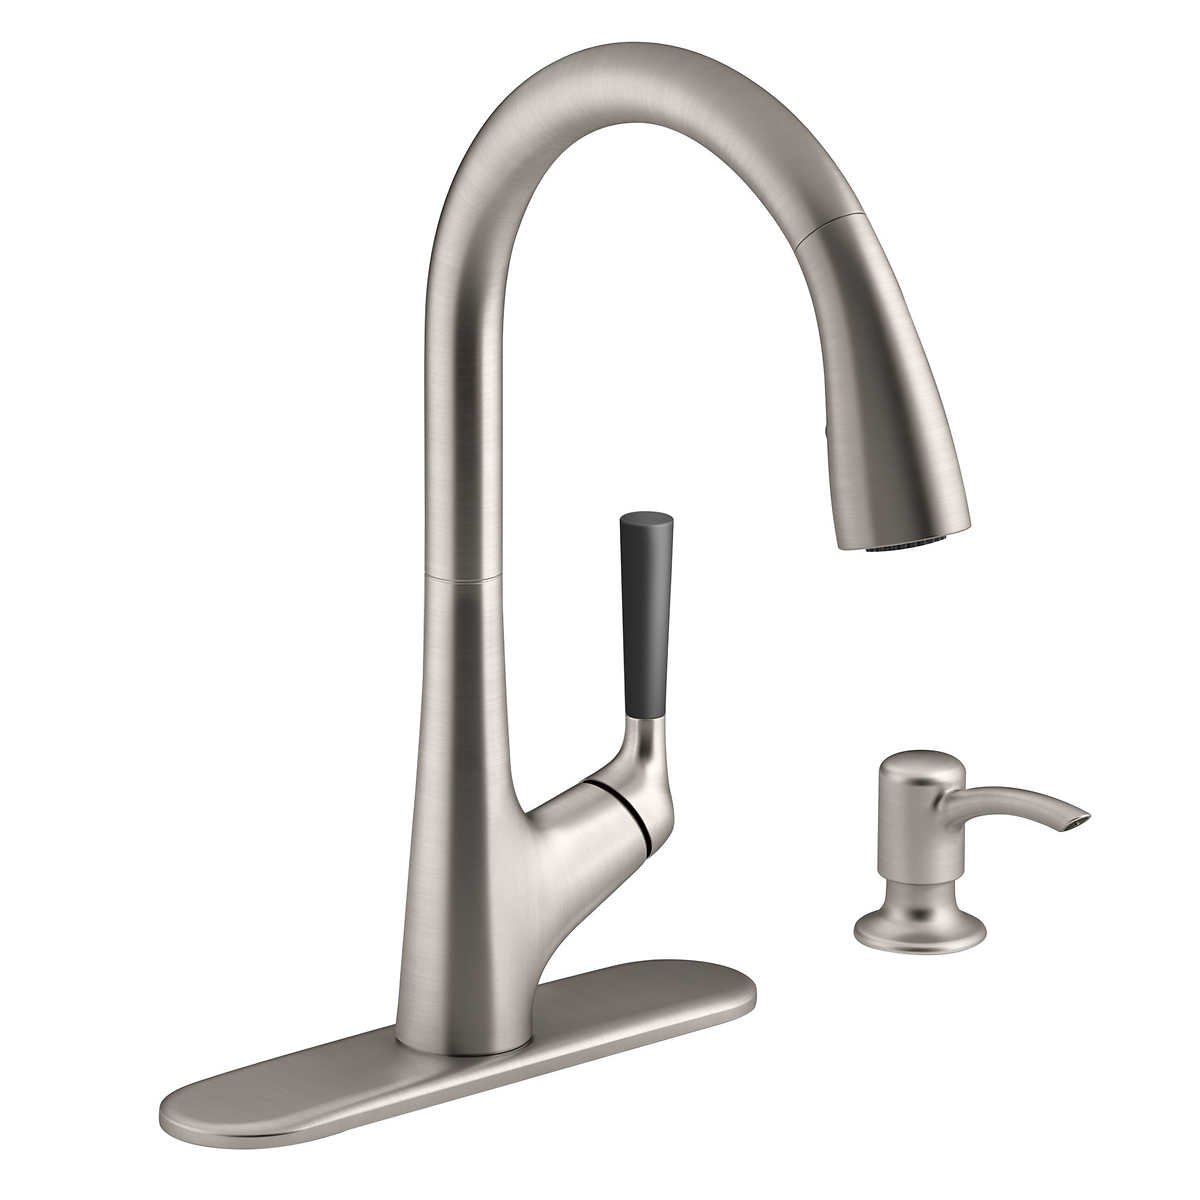 Kohler Malleco Pull Down Kitchen Sink Faucet With Soap Dispenser